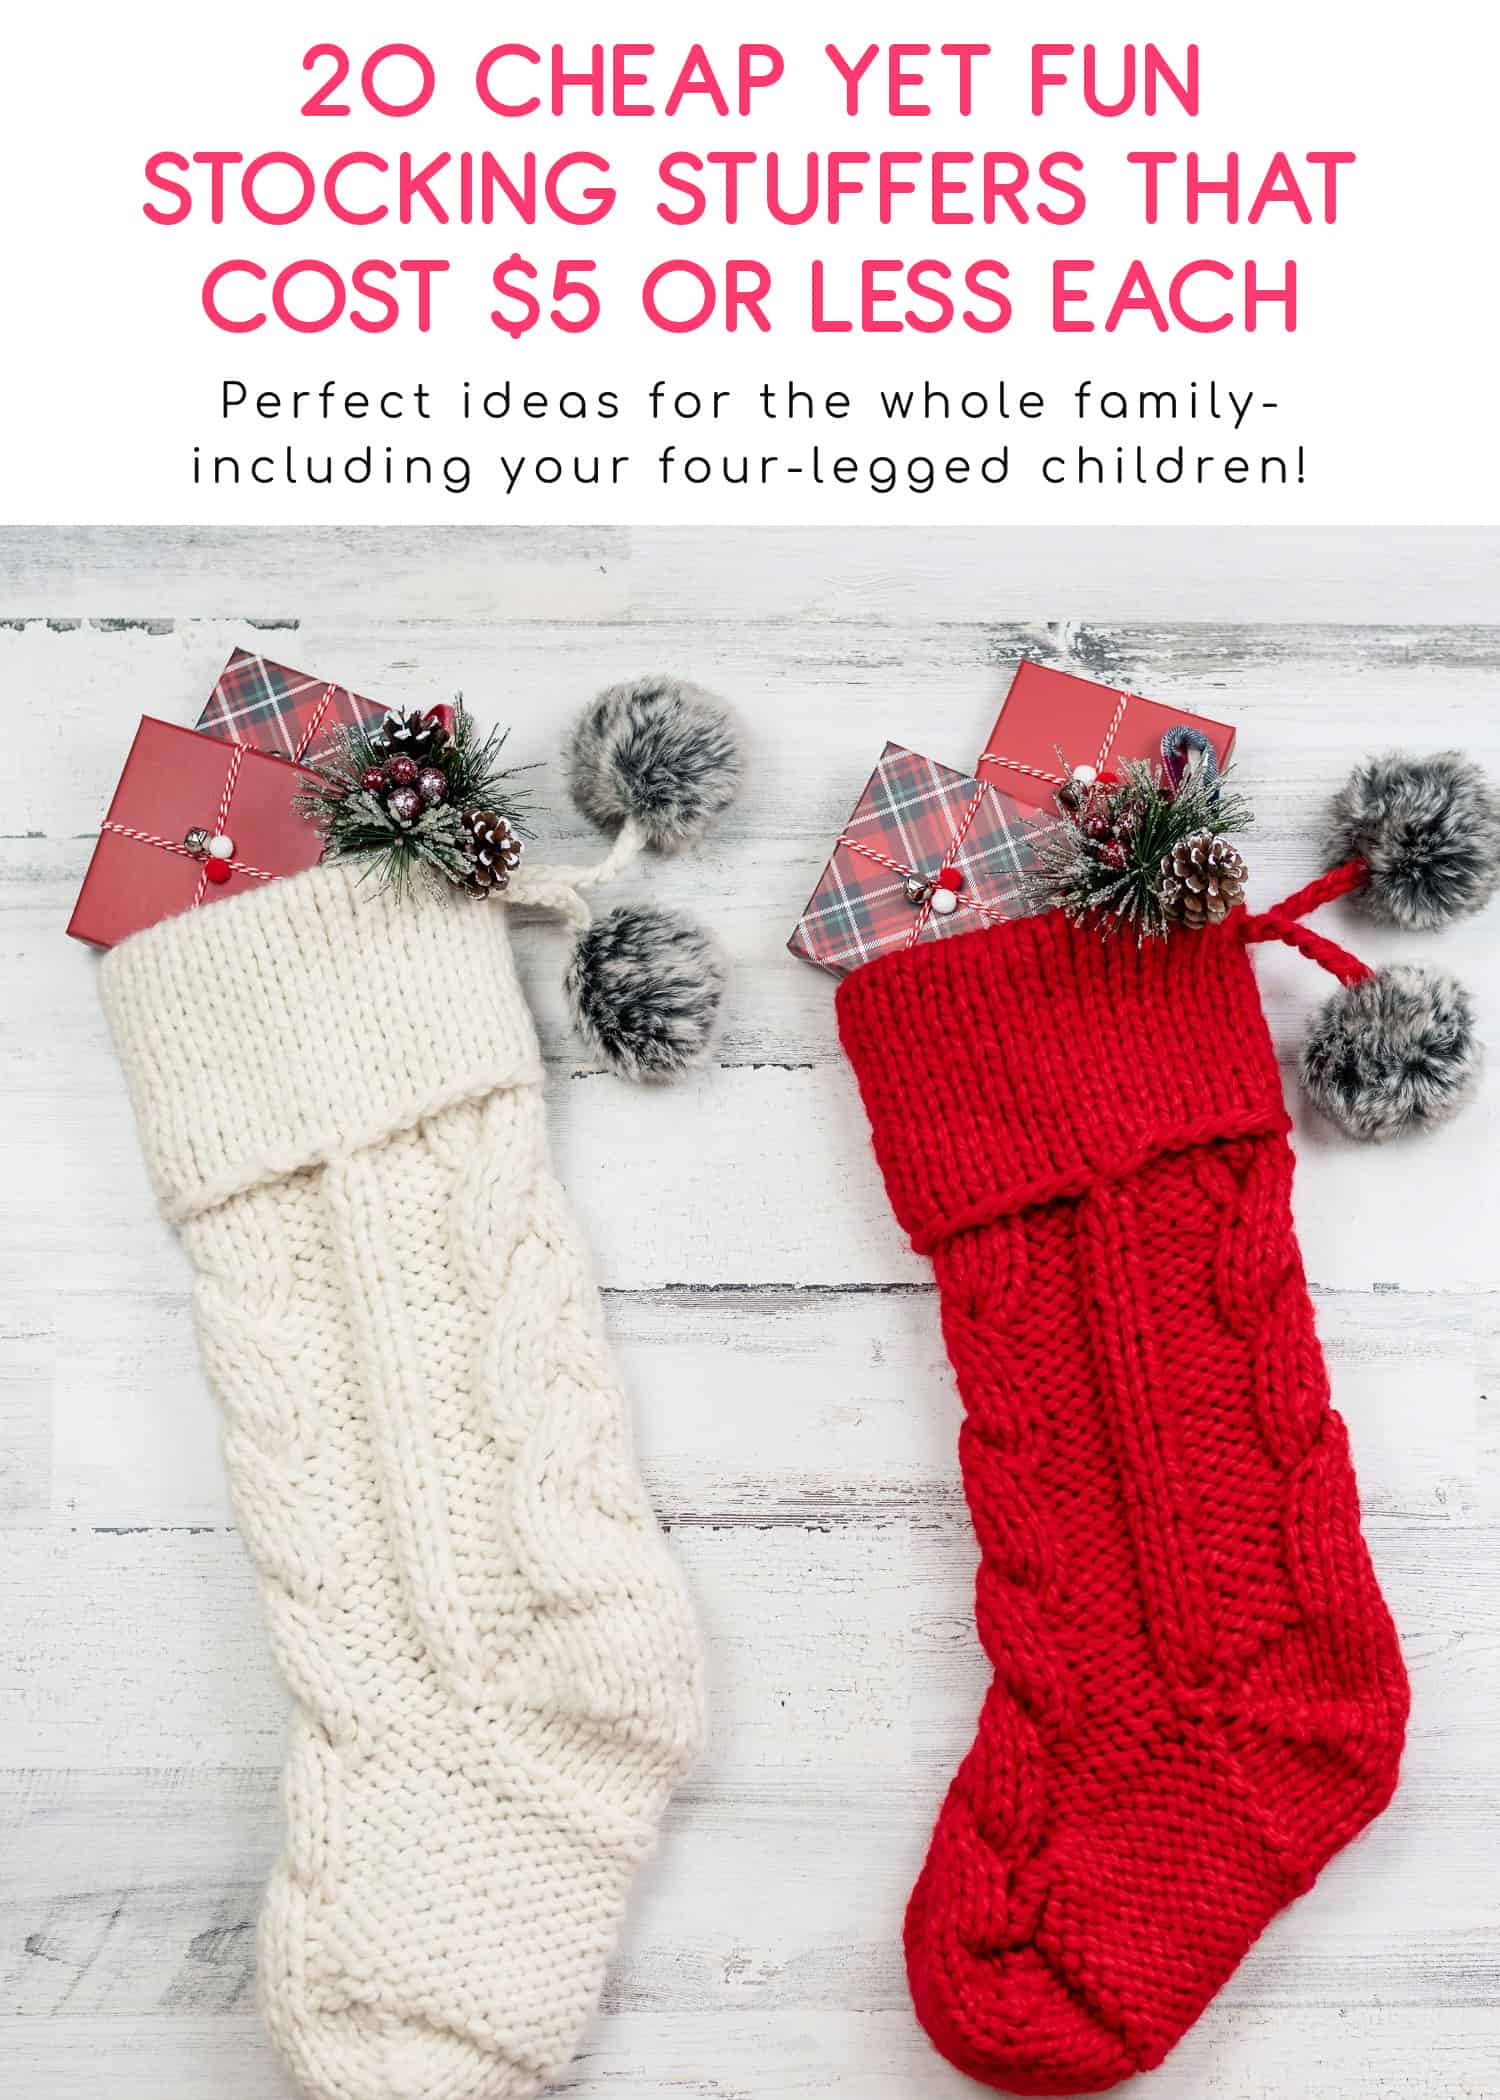 Finding cheap stocking stuffers is way harder than it should be, but I've got you covered. These ideas for the whole family (pets, too!) cost $5 or less!